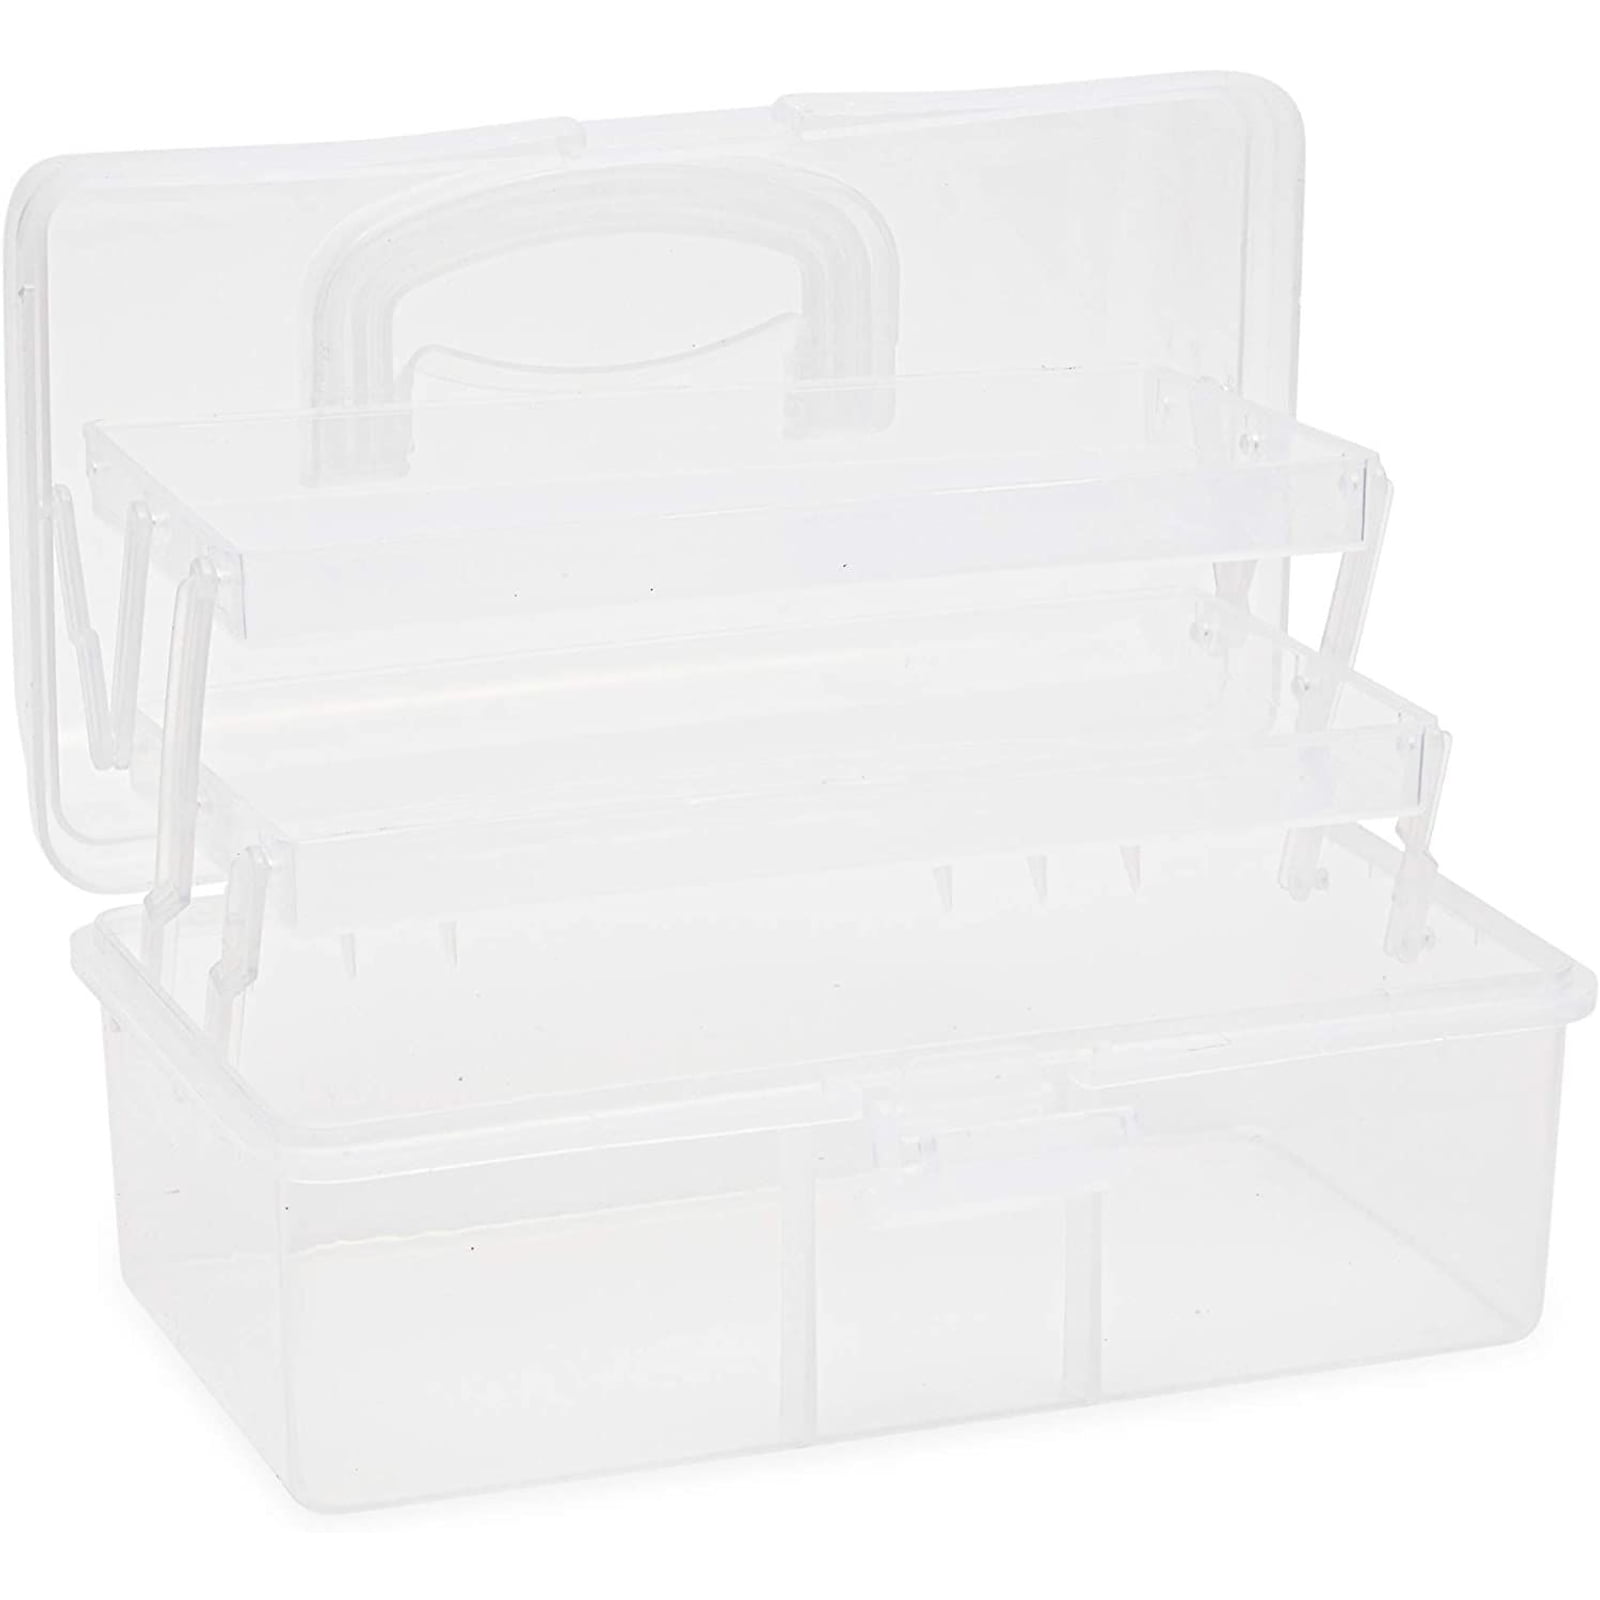 Art and Craft Supply Case, Clear Storage Art Tool Box, Organizer with 2  Trays (9 x 5 x 4.25 in) 